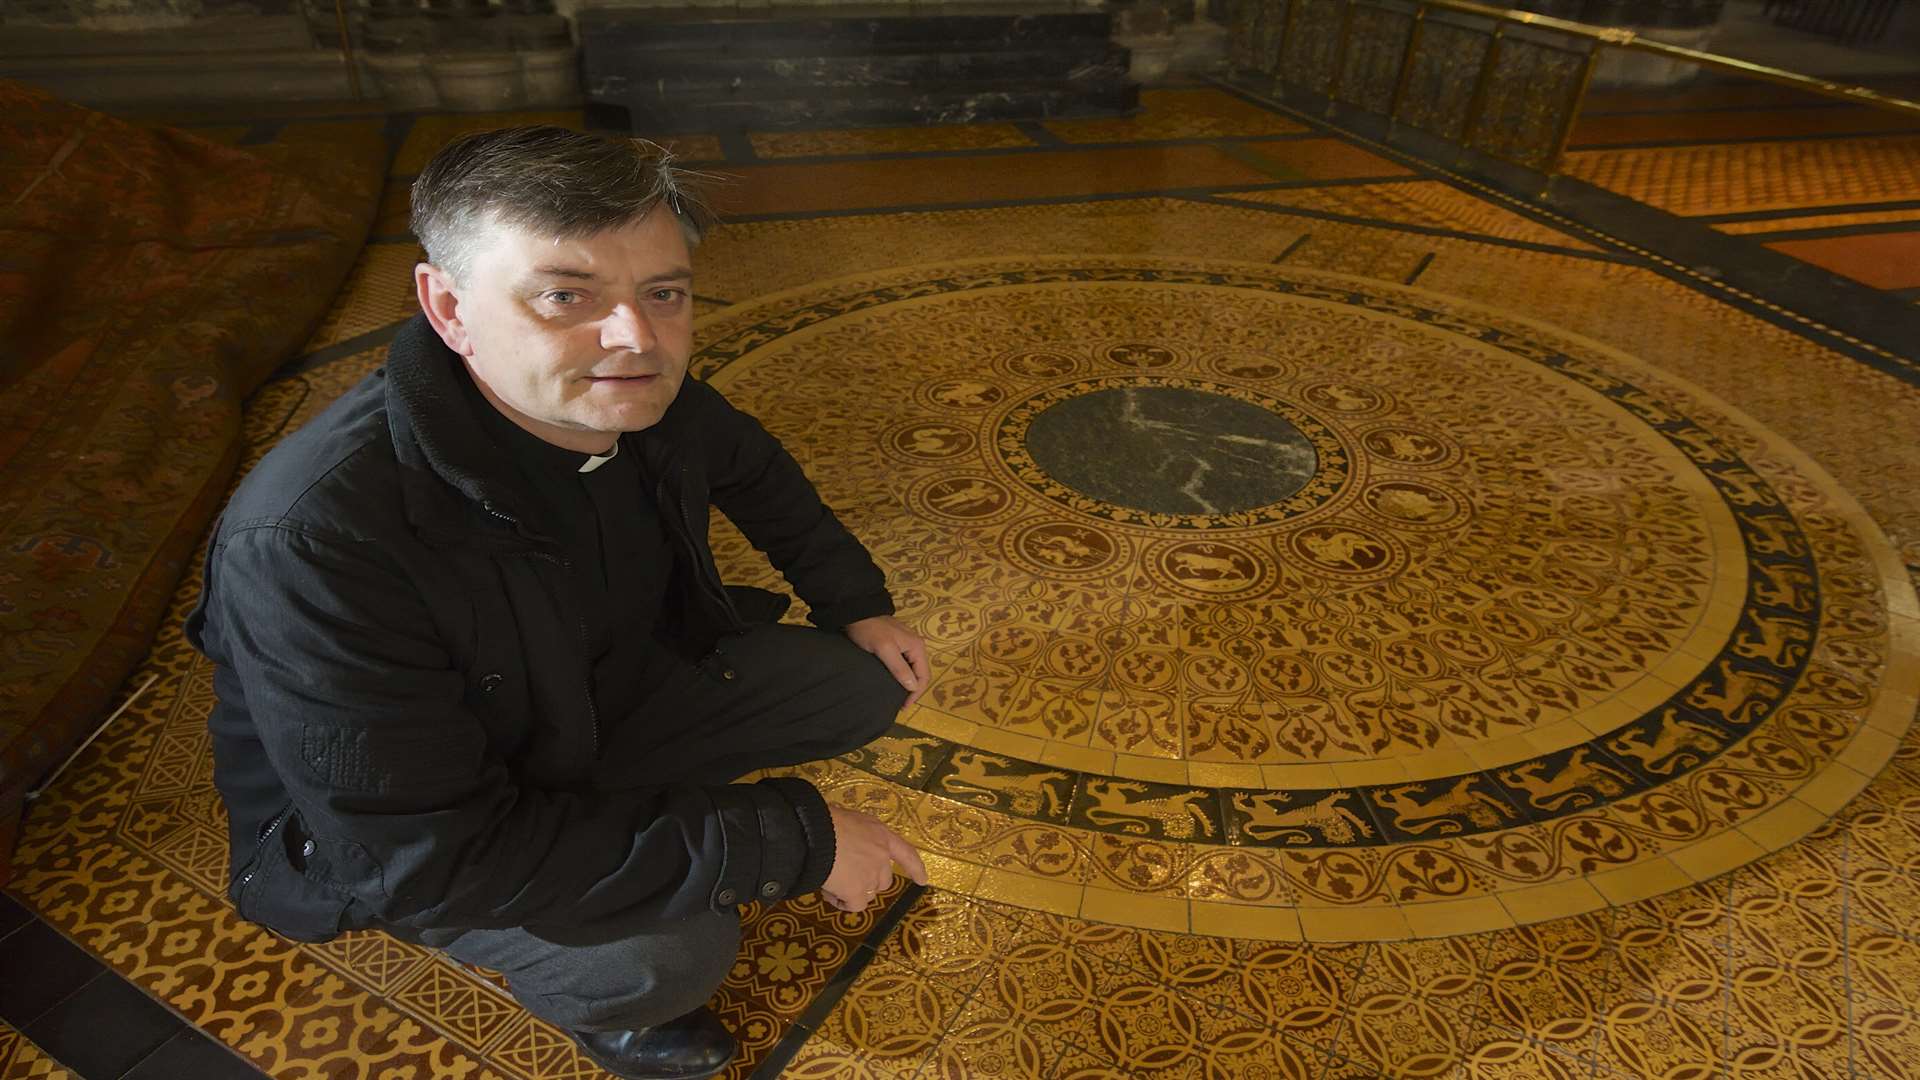 Philip Hesketh with the Zodiac tiling near the high alter in Rochester Cathedral